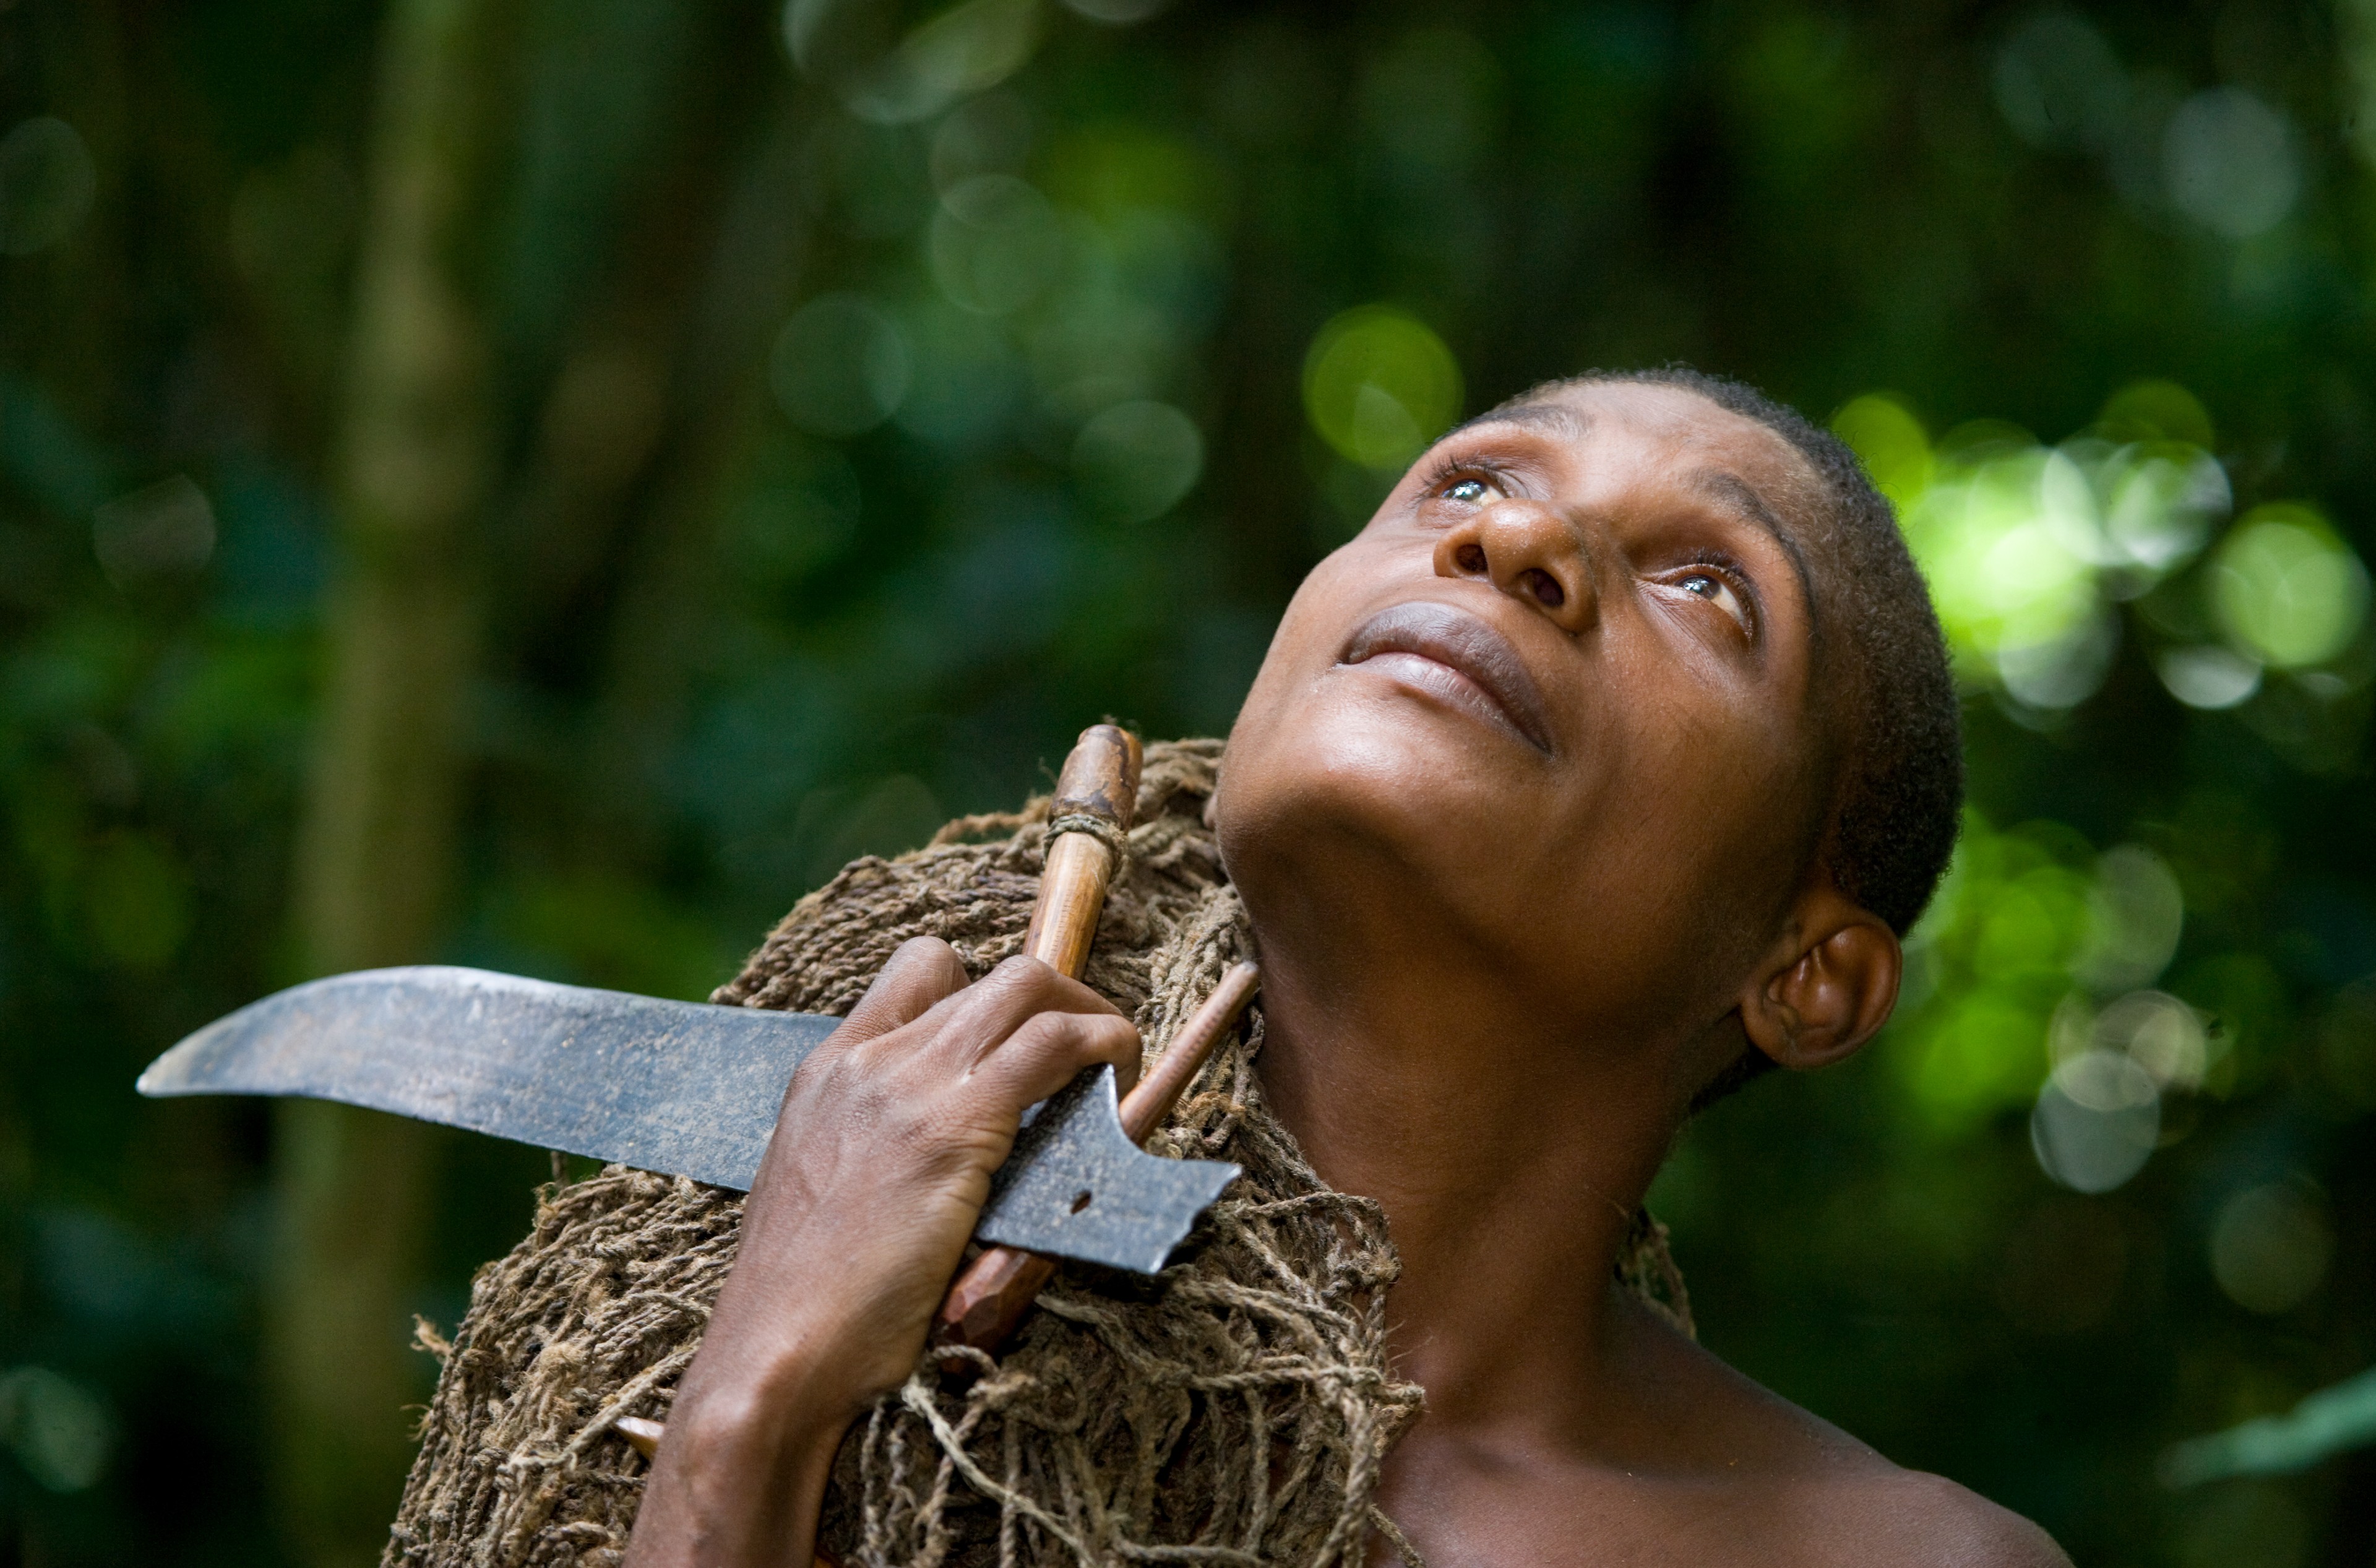 A woman from a tribe in the forest. Dzanga-Sangha Forest Reserve, Central African Republic © GUDKOV ANDREY, Shutterstock